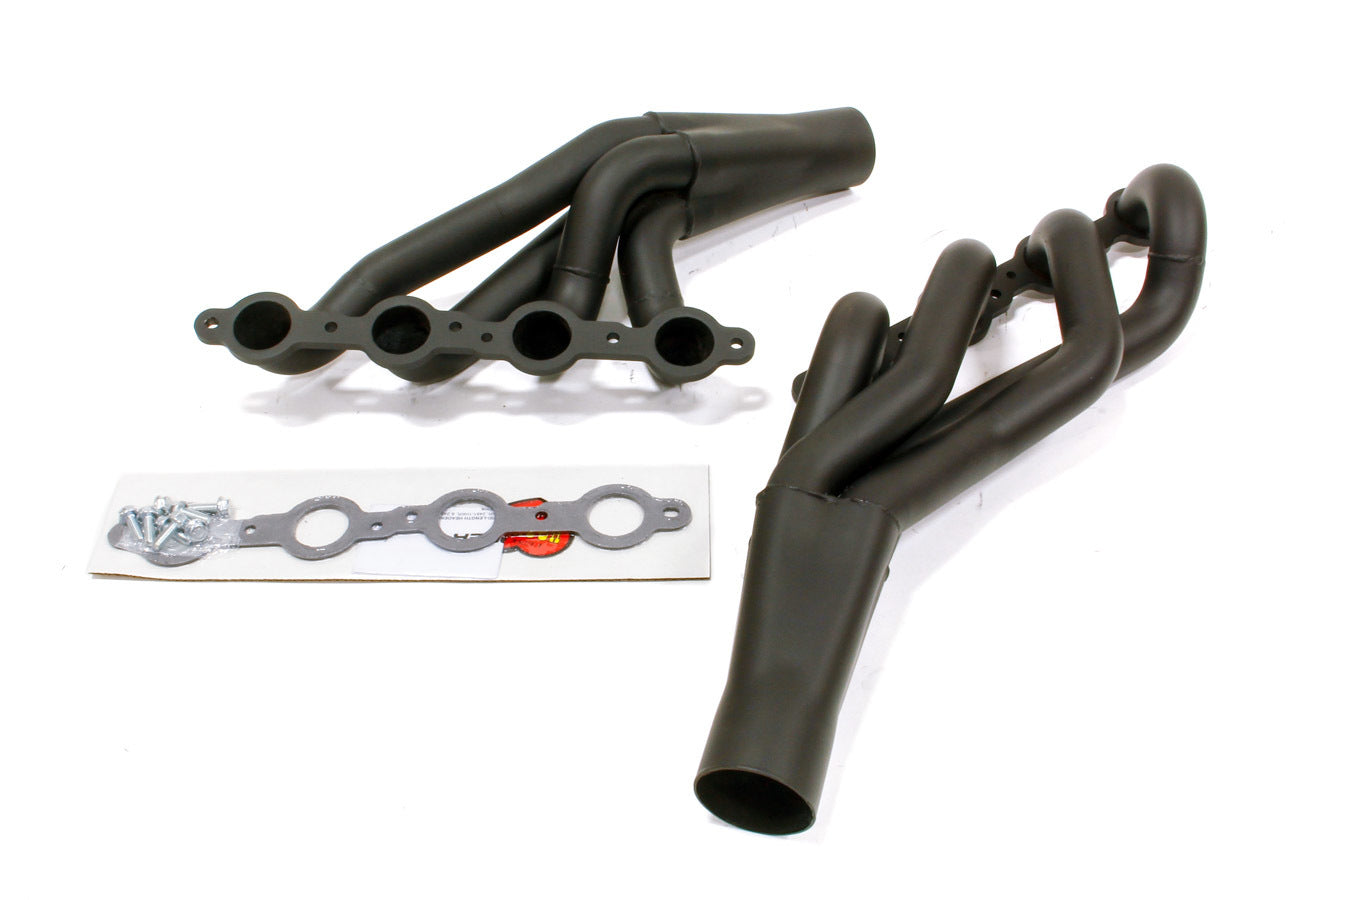 Hooker 1-7/8 Headers - GM LS in GM A/G Body 78-88 HKR2481